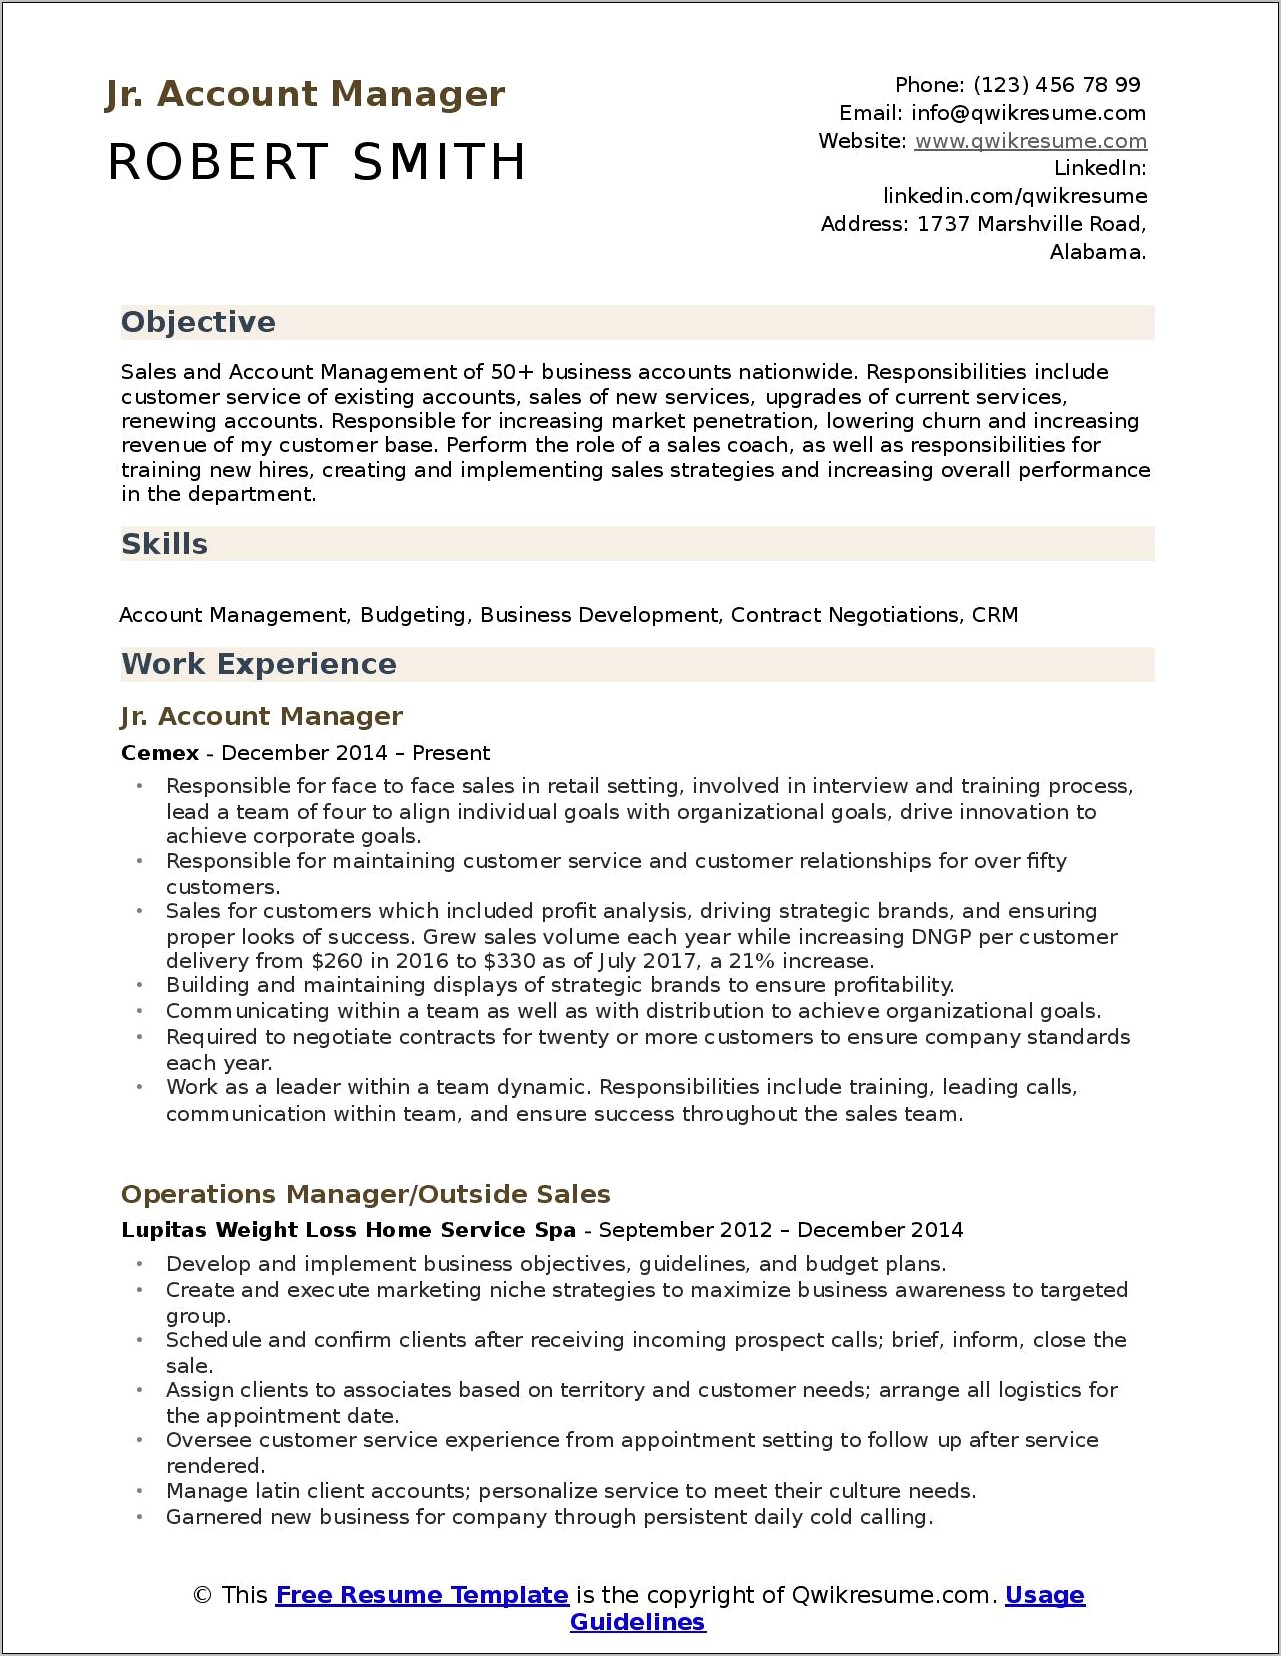 Sample Resume For Client Onboarding Specialist